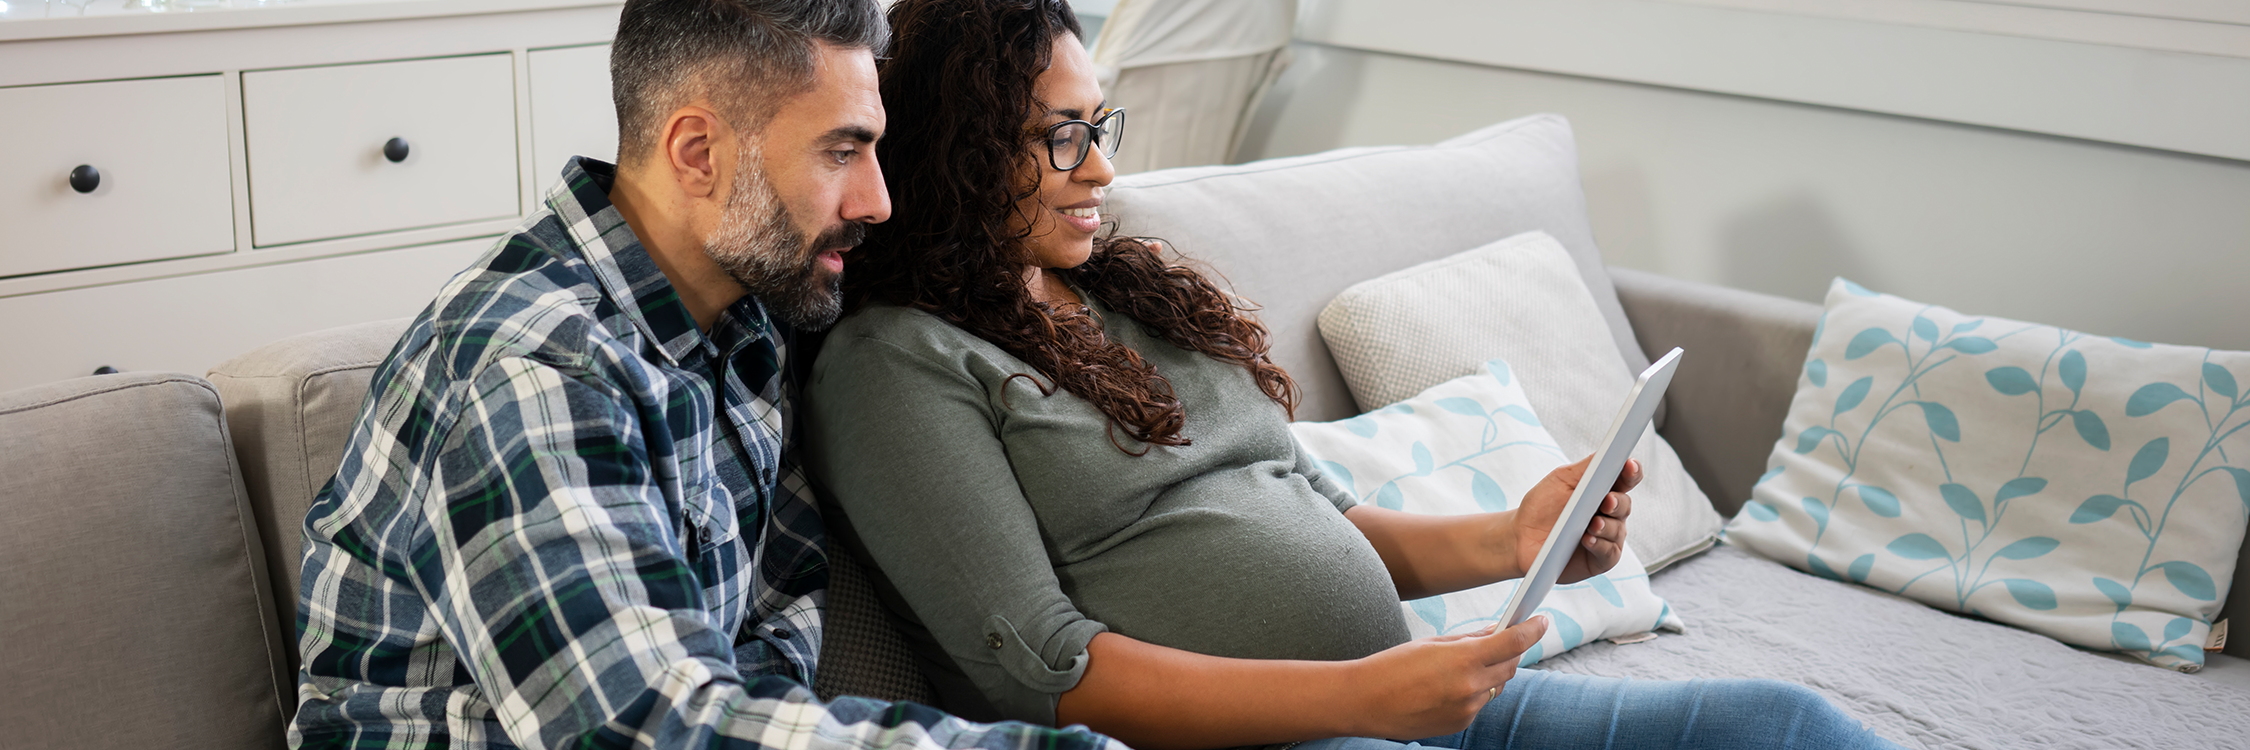 photo: couple holding tablet; woman is pregnant